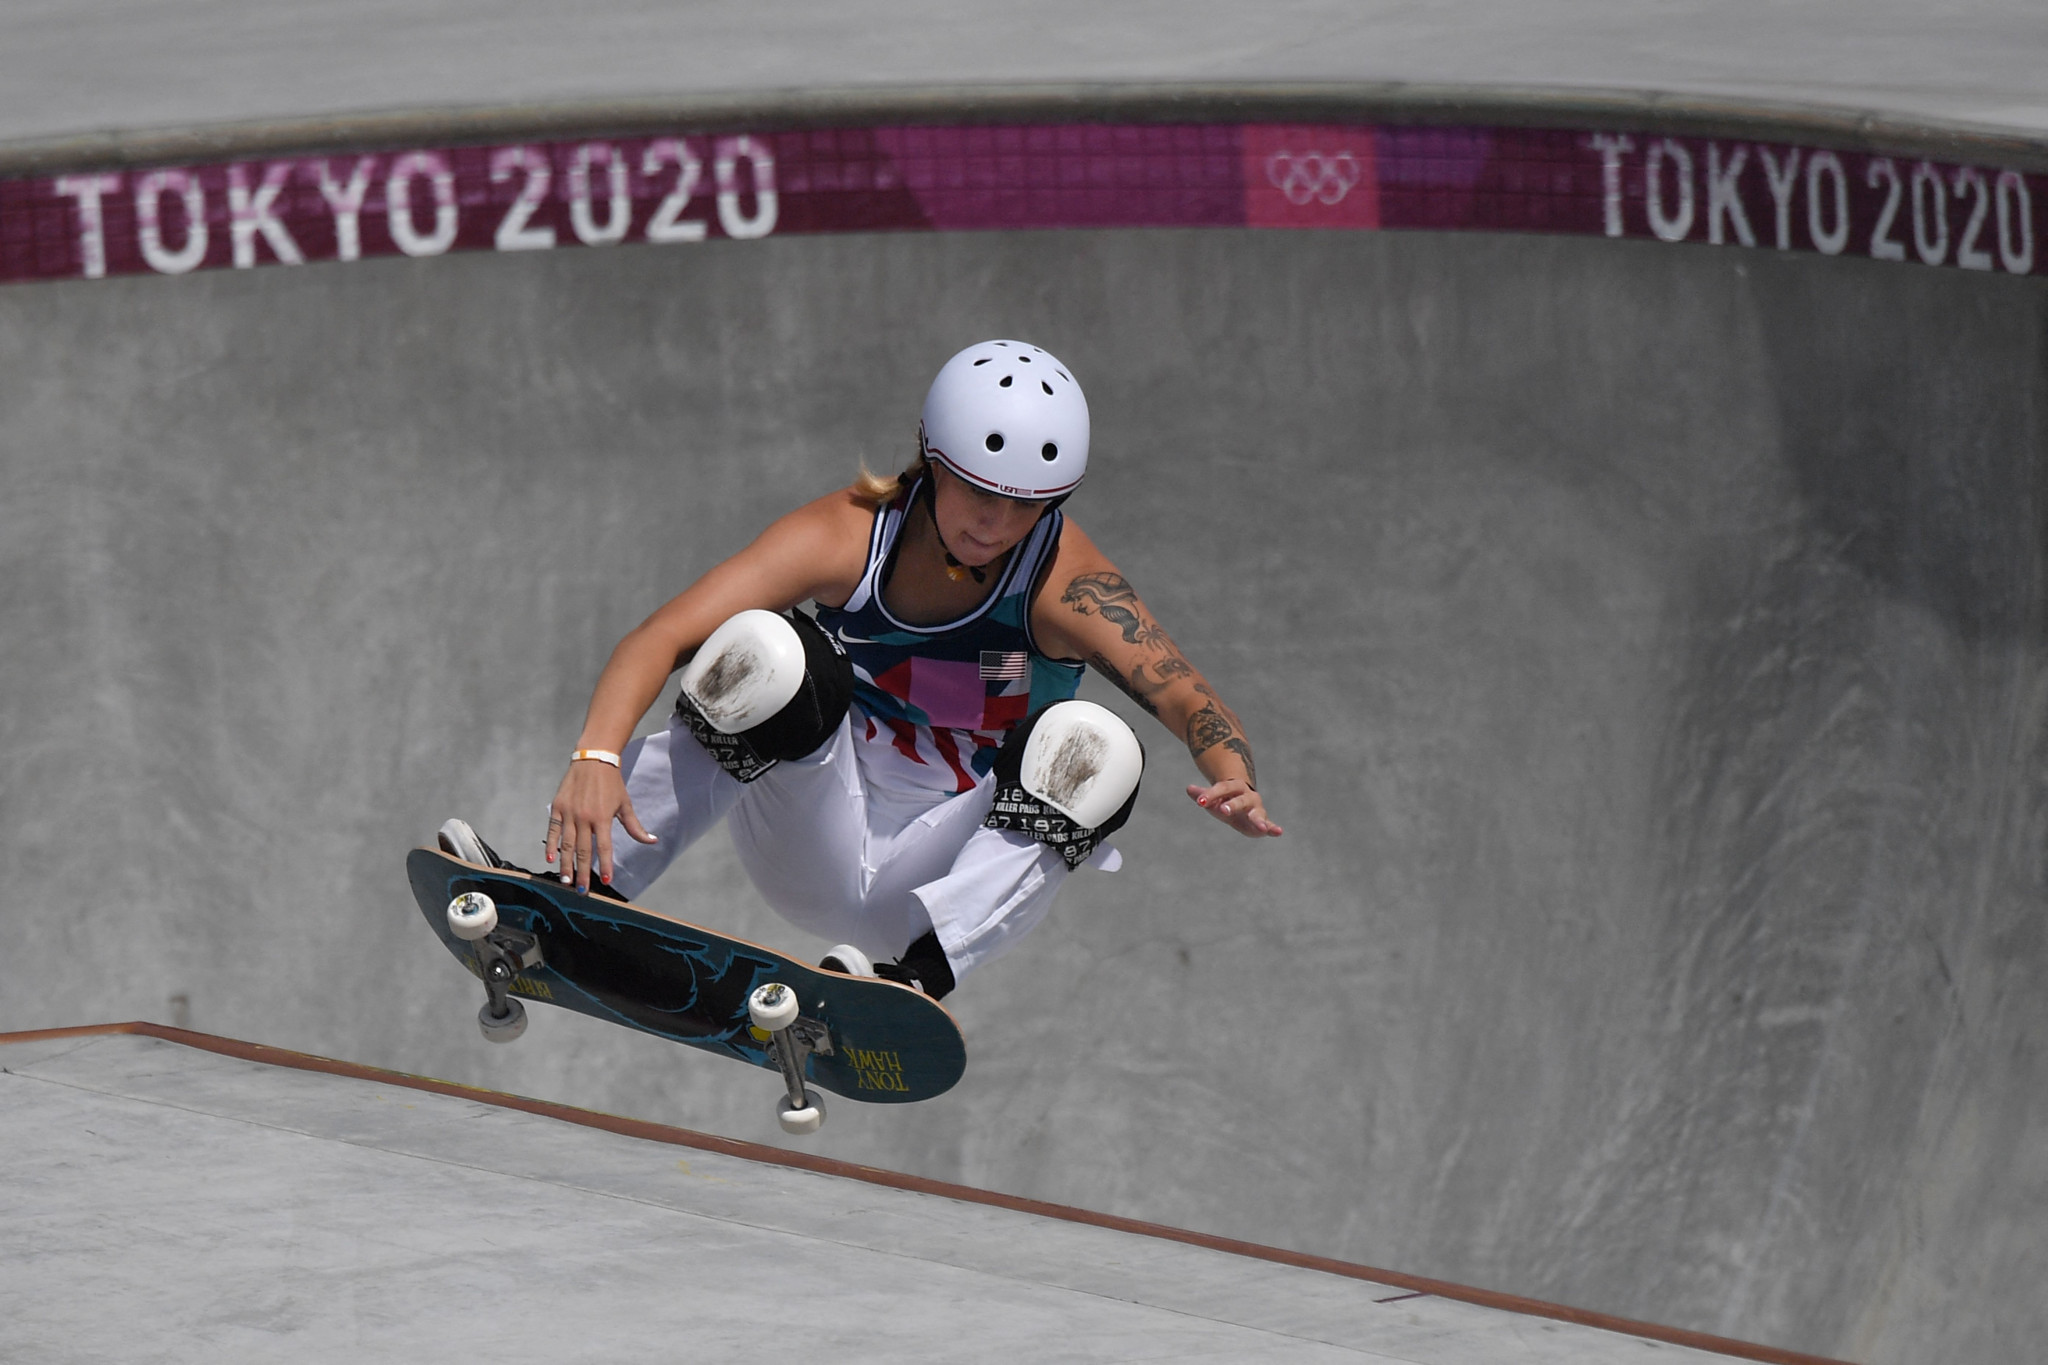 Gary Ream oversaw skateboarding's Olympic debut at Tokyo 2020 and will be in charge of the sport at Paris 2024 ©Getty Images